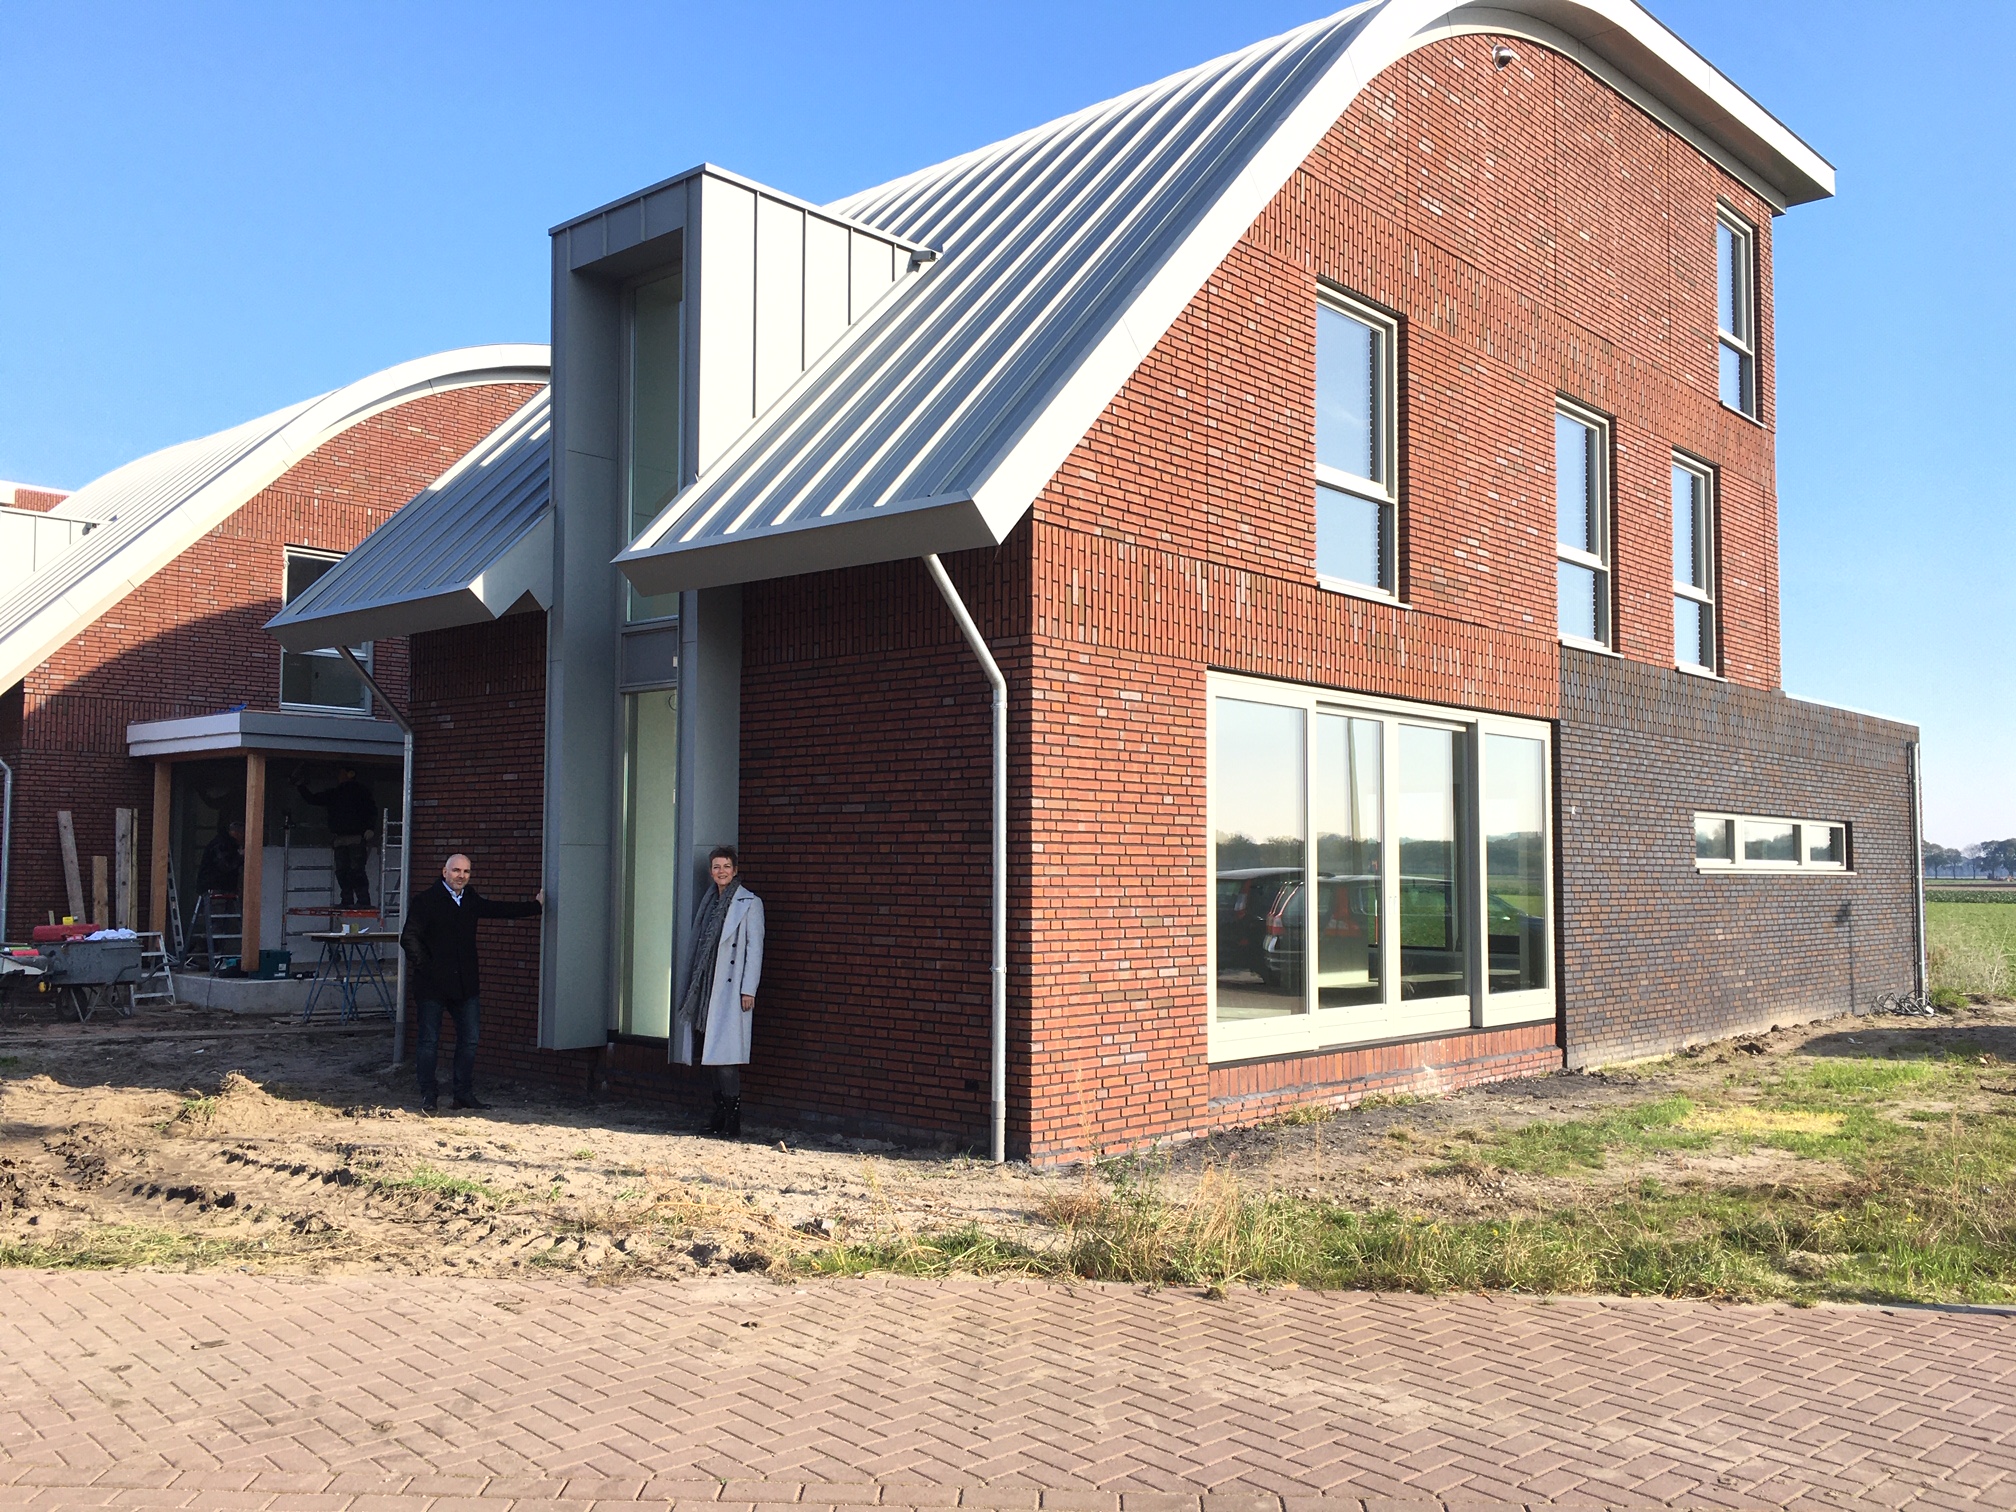 Kavel 13 project Sedum opgeleverd, Fase 1 is voltooid!